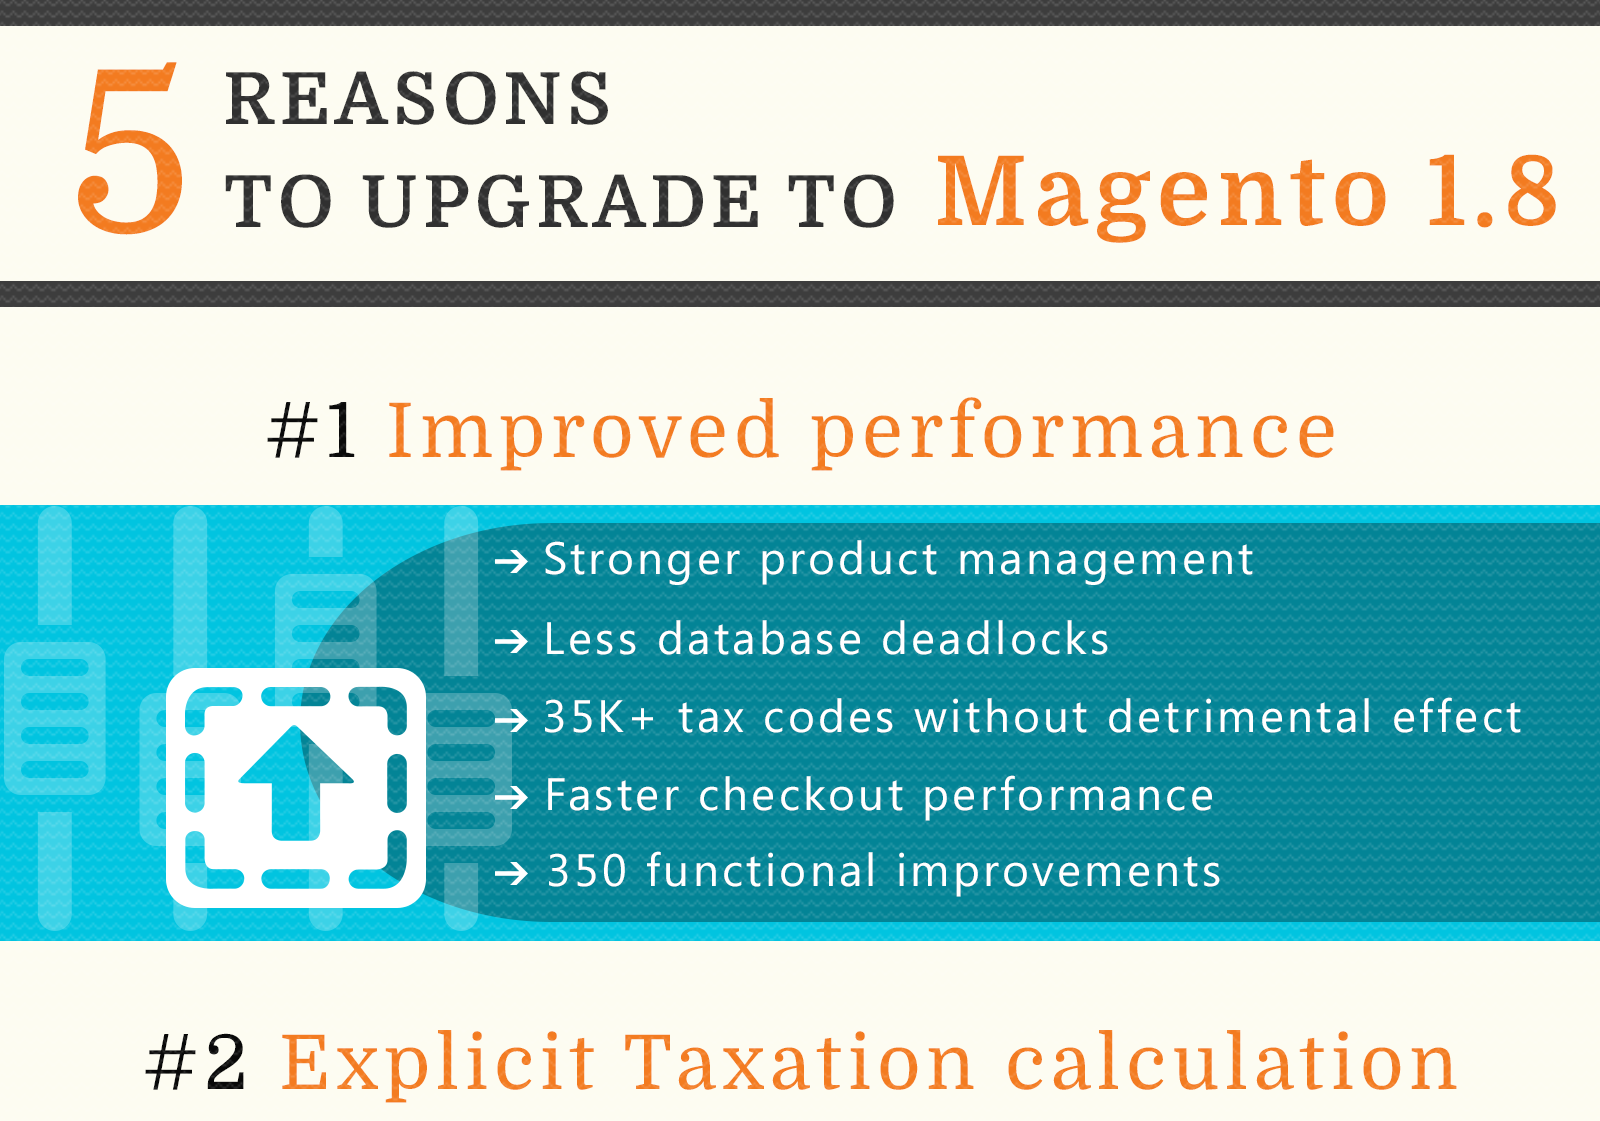 Infographic: 5 reasons for upgrading to Magento 1.8